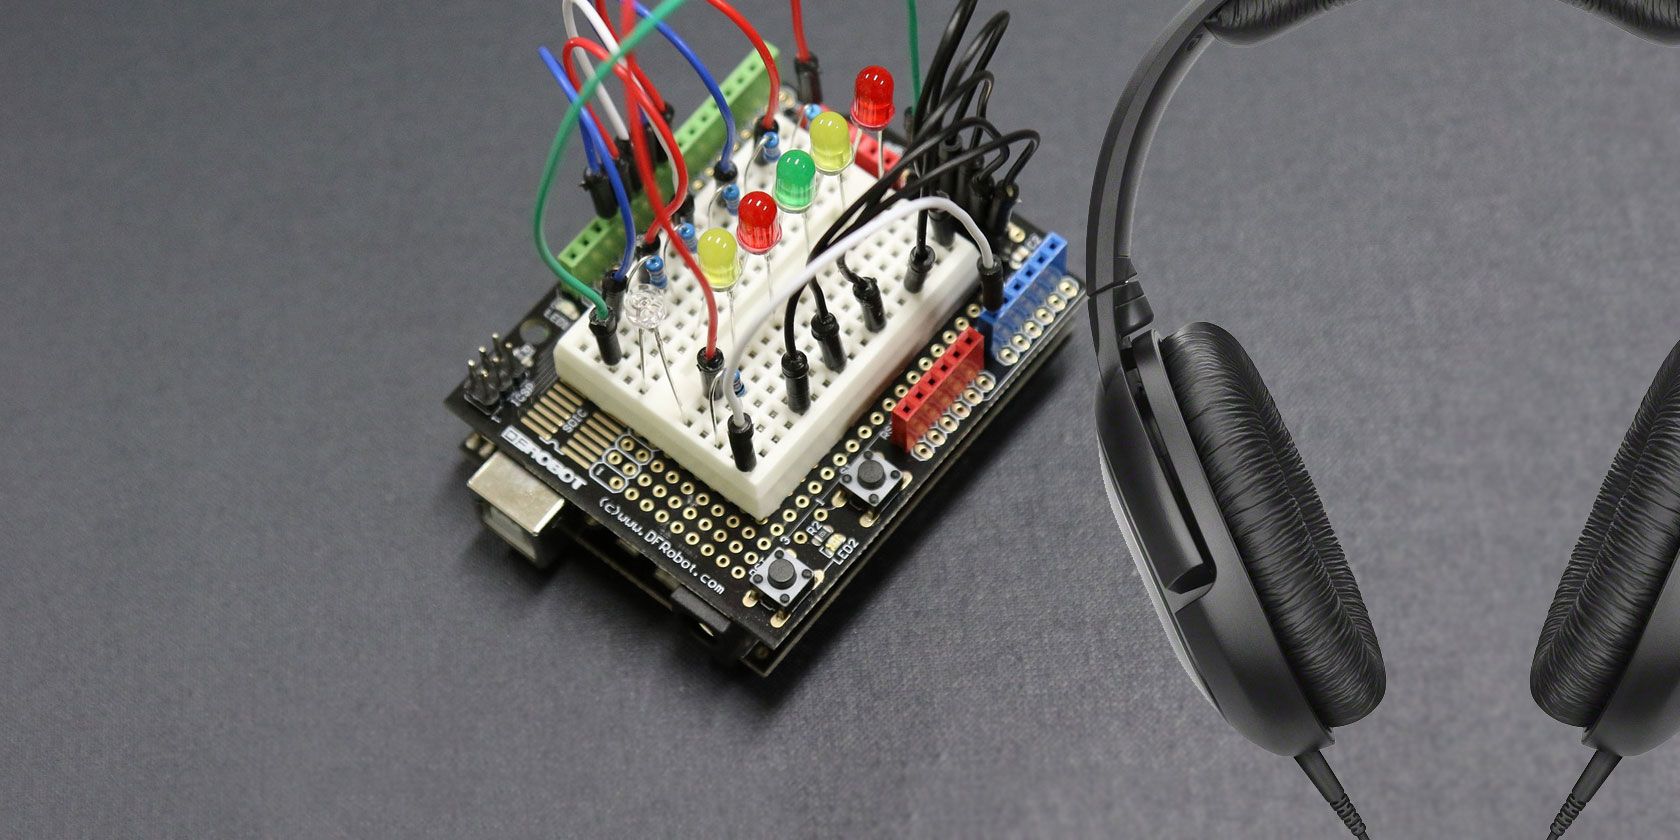 diy-arduino-cool-projects